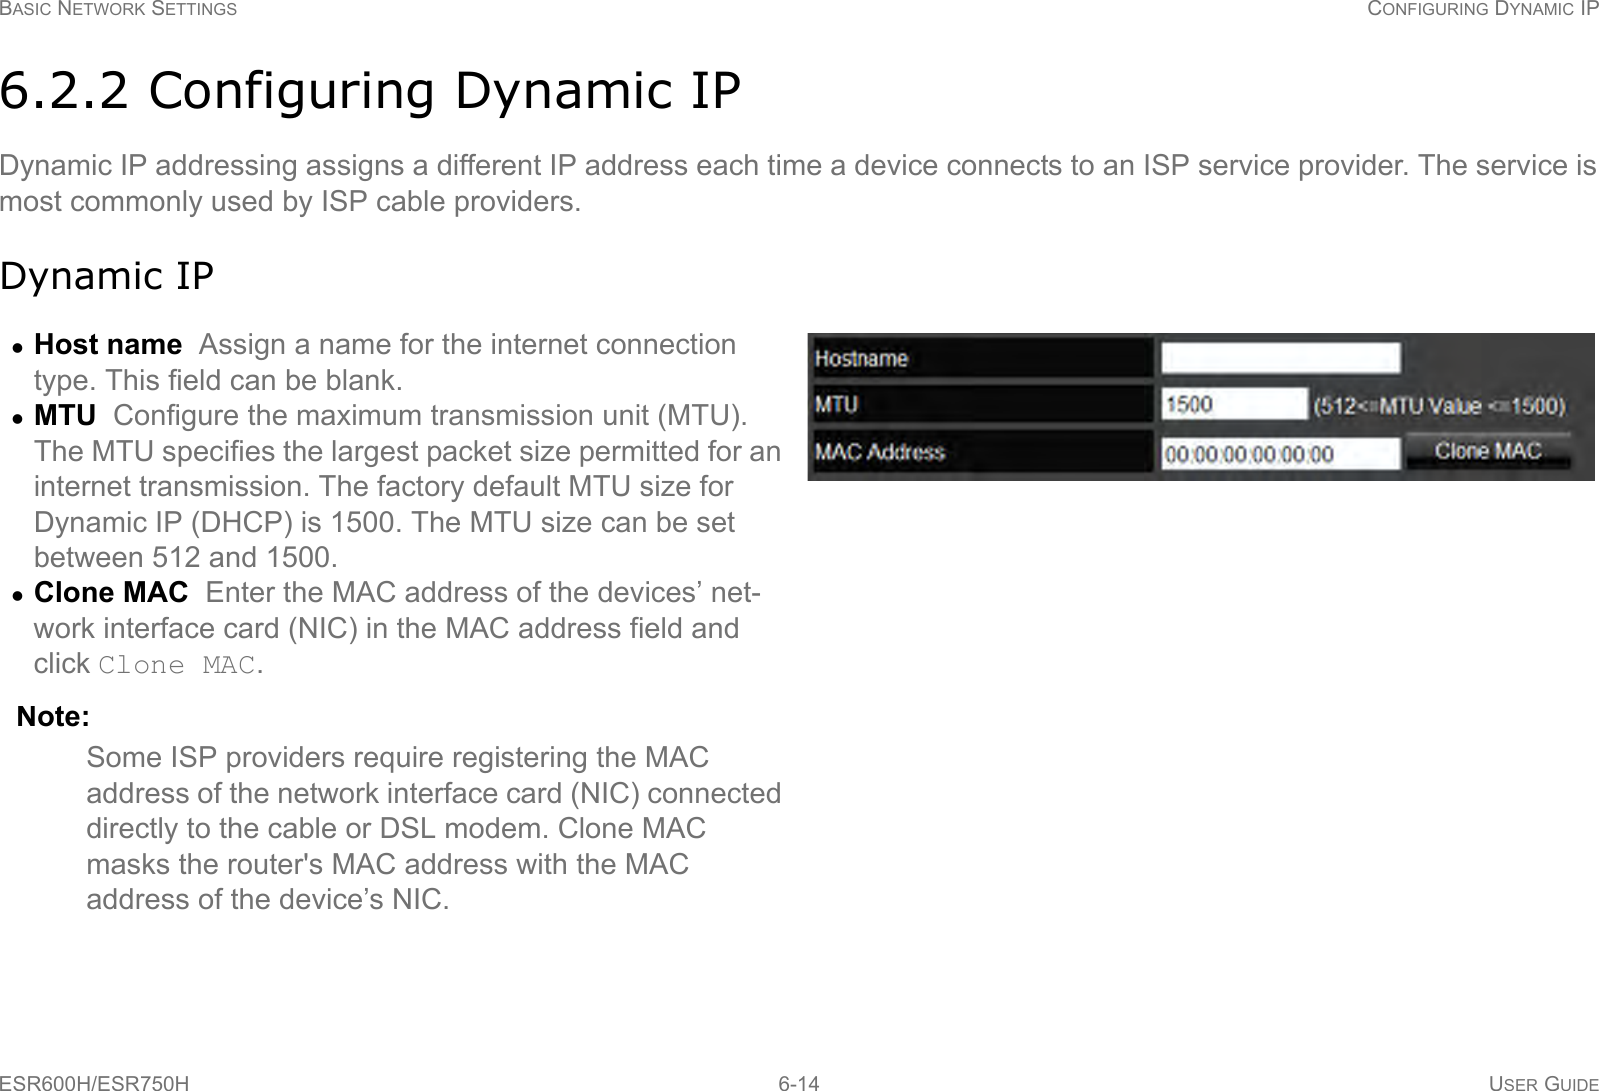 BASIC NETWORK SETTINGS CONFIGURING DYNAMIC IPESR600H/ESR750H 6-14 USER GUIDE6.2.2 Configuring Dynamic IPDynamic IP addressing assigns a different IP address each time a device connects to an ISP service provider. The service is most commonly used by ISP cable providers.Dynamic IPHost name  Assign a name for the internet connection type. This field can be blank.MTU  Configure the maximum transmission unit (MTU). The MTU specifies the largest packet size permitted for an internet transmission. The factory default MTU size for Dynamic IP (DHCP) is 1500. The MTU size can be set between 512 and 1500.Clone MAC  Enter the MAC address of the devices’ net-work interface card (NIC) in the MAC address field and click Clone MAC. Note:Some ISP providers require registering the MAC address of the network interface card (NIC) connected directly to the cable or DSL modem. Clone MAC masks the router&apos;s MAC address with the MAC address of the device’s NIC.